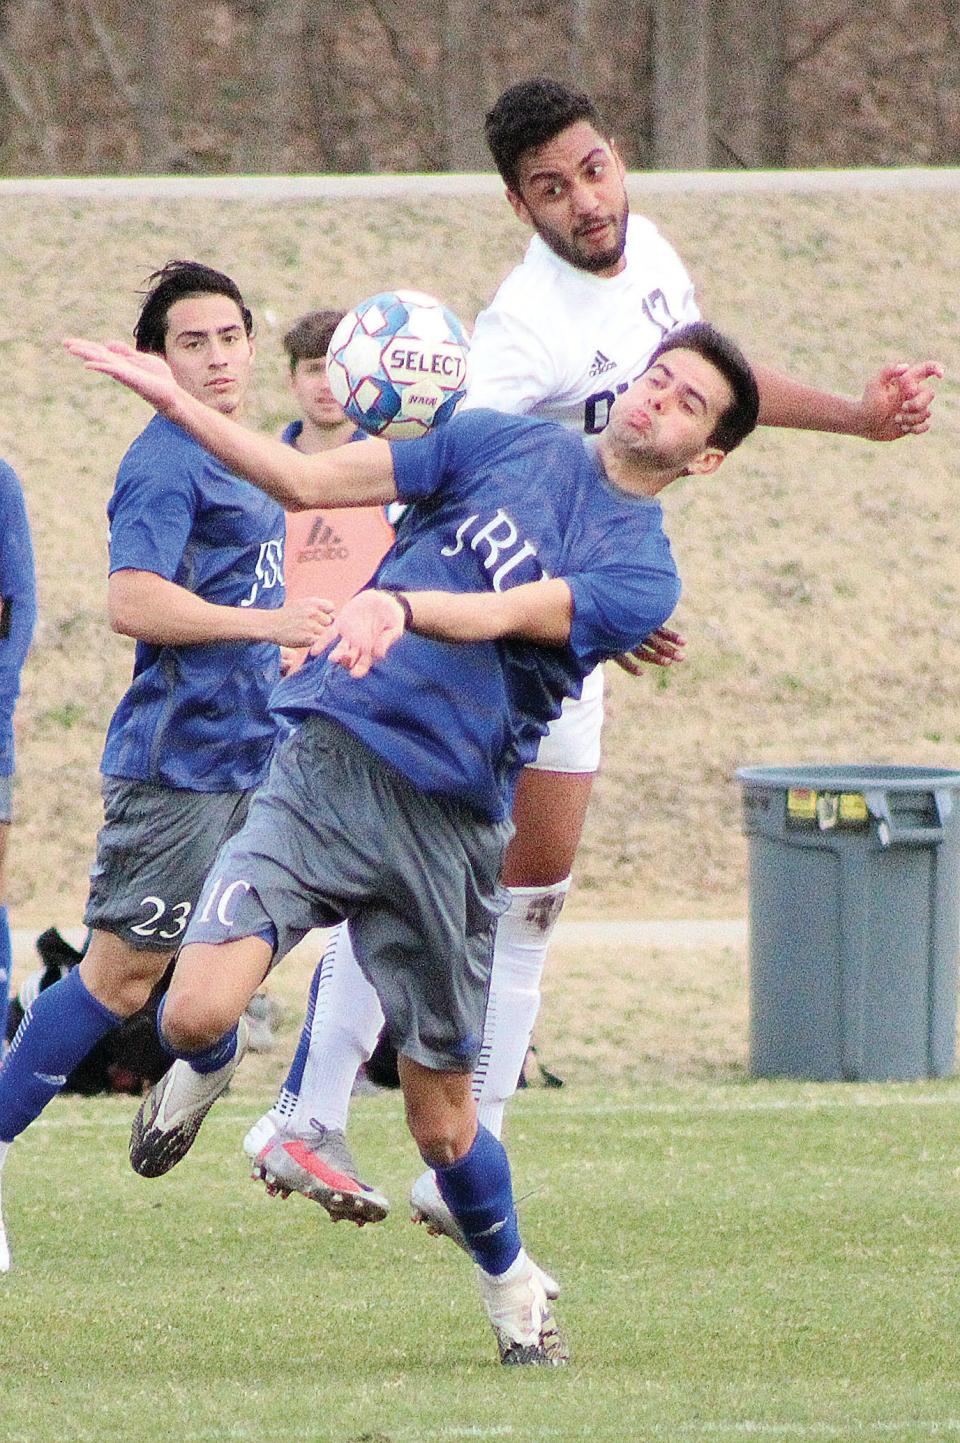 Oklahoma Wesleyan University's Alfeu Bertini, second from right, battles with a John Brown University player for ball possession during 2020 men's soccer season action.